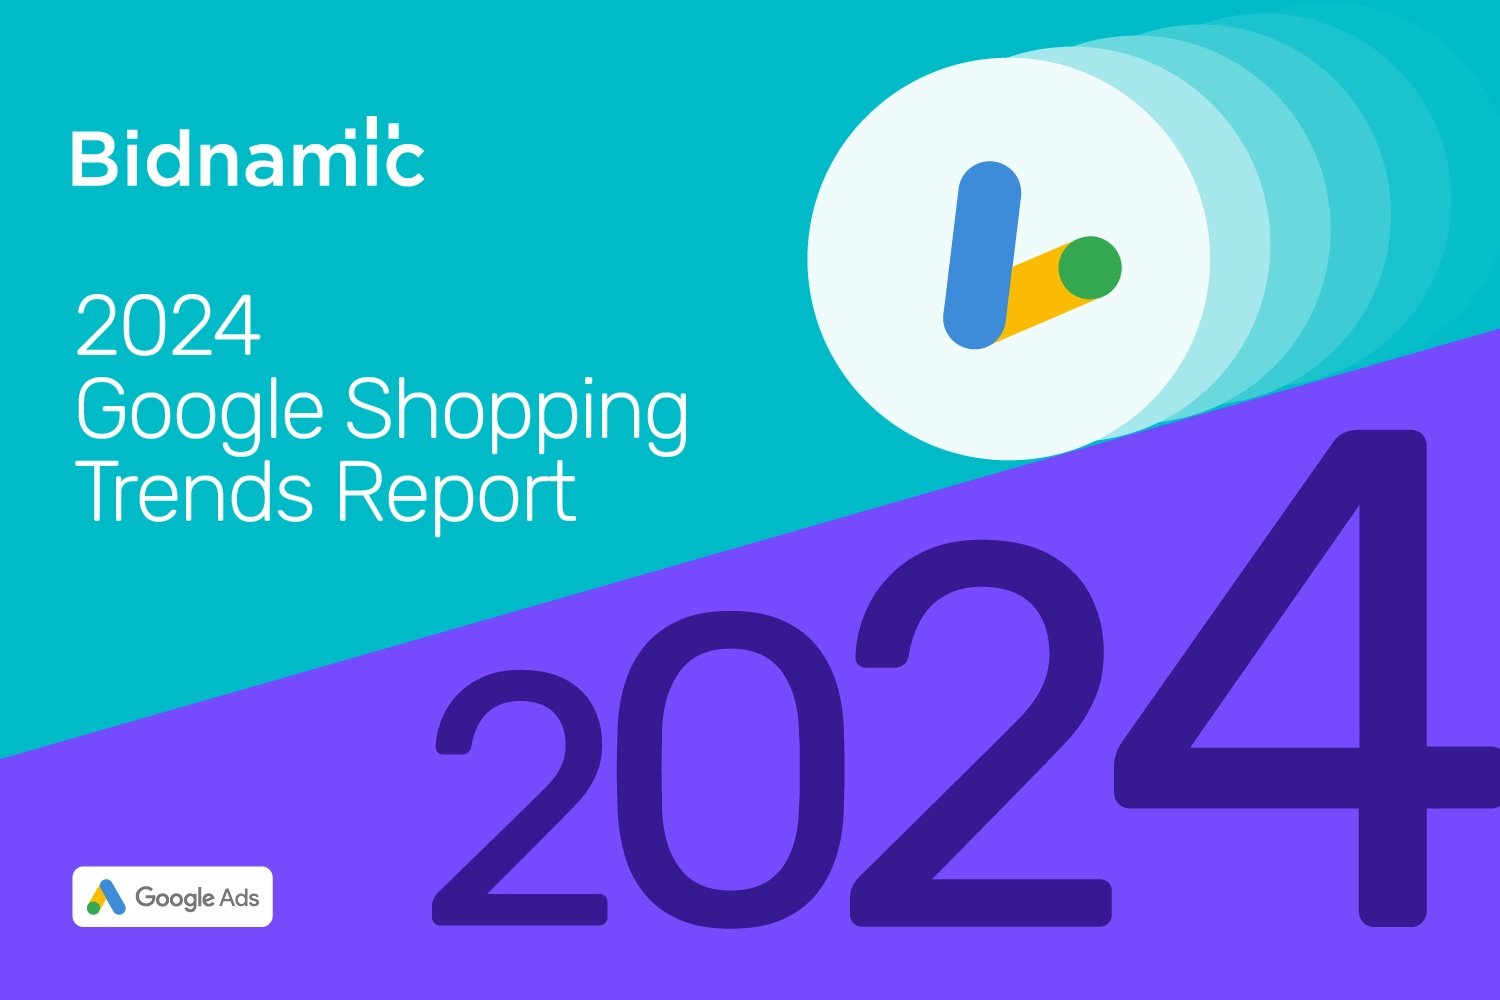 The cover of Bidnamic's 2024 Google Shopping Trends Report